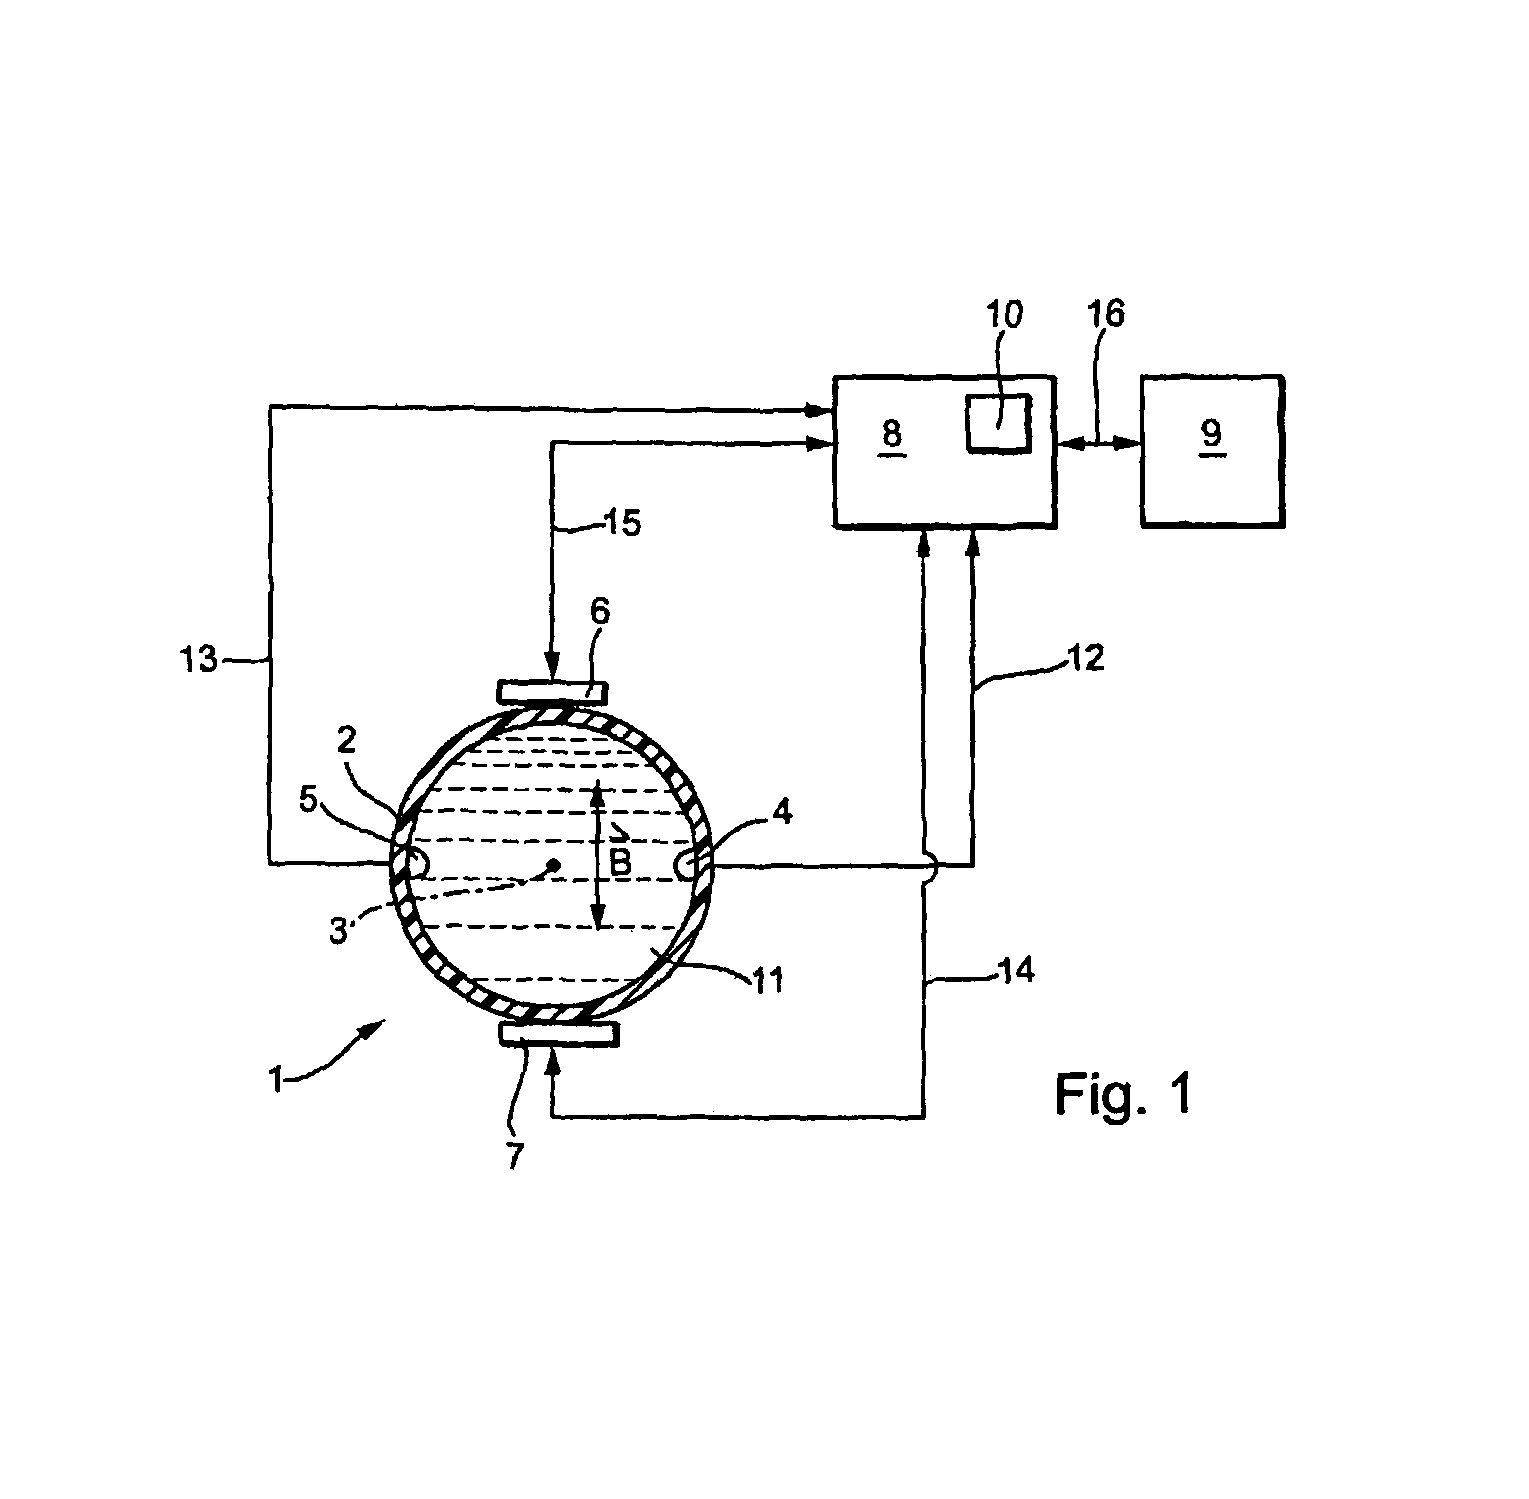 Magneto-inductive flow measuring device